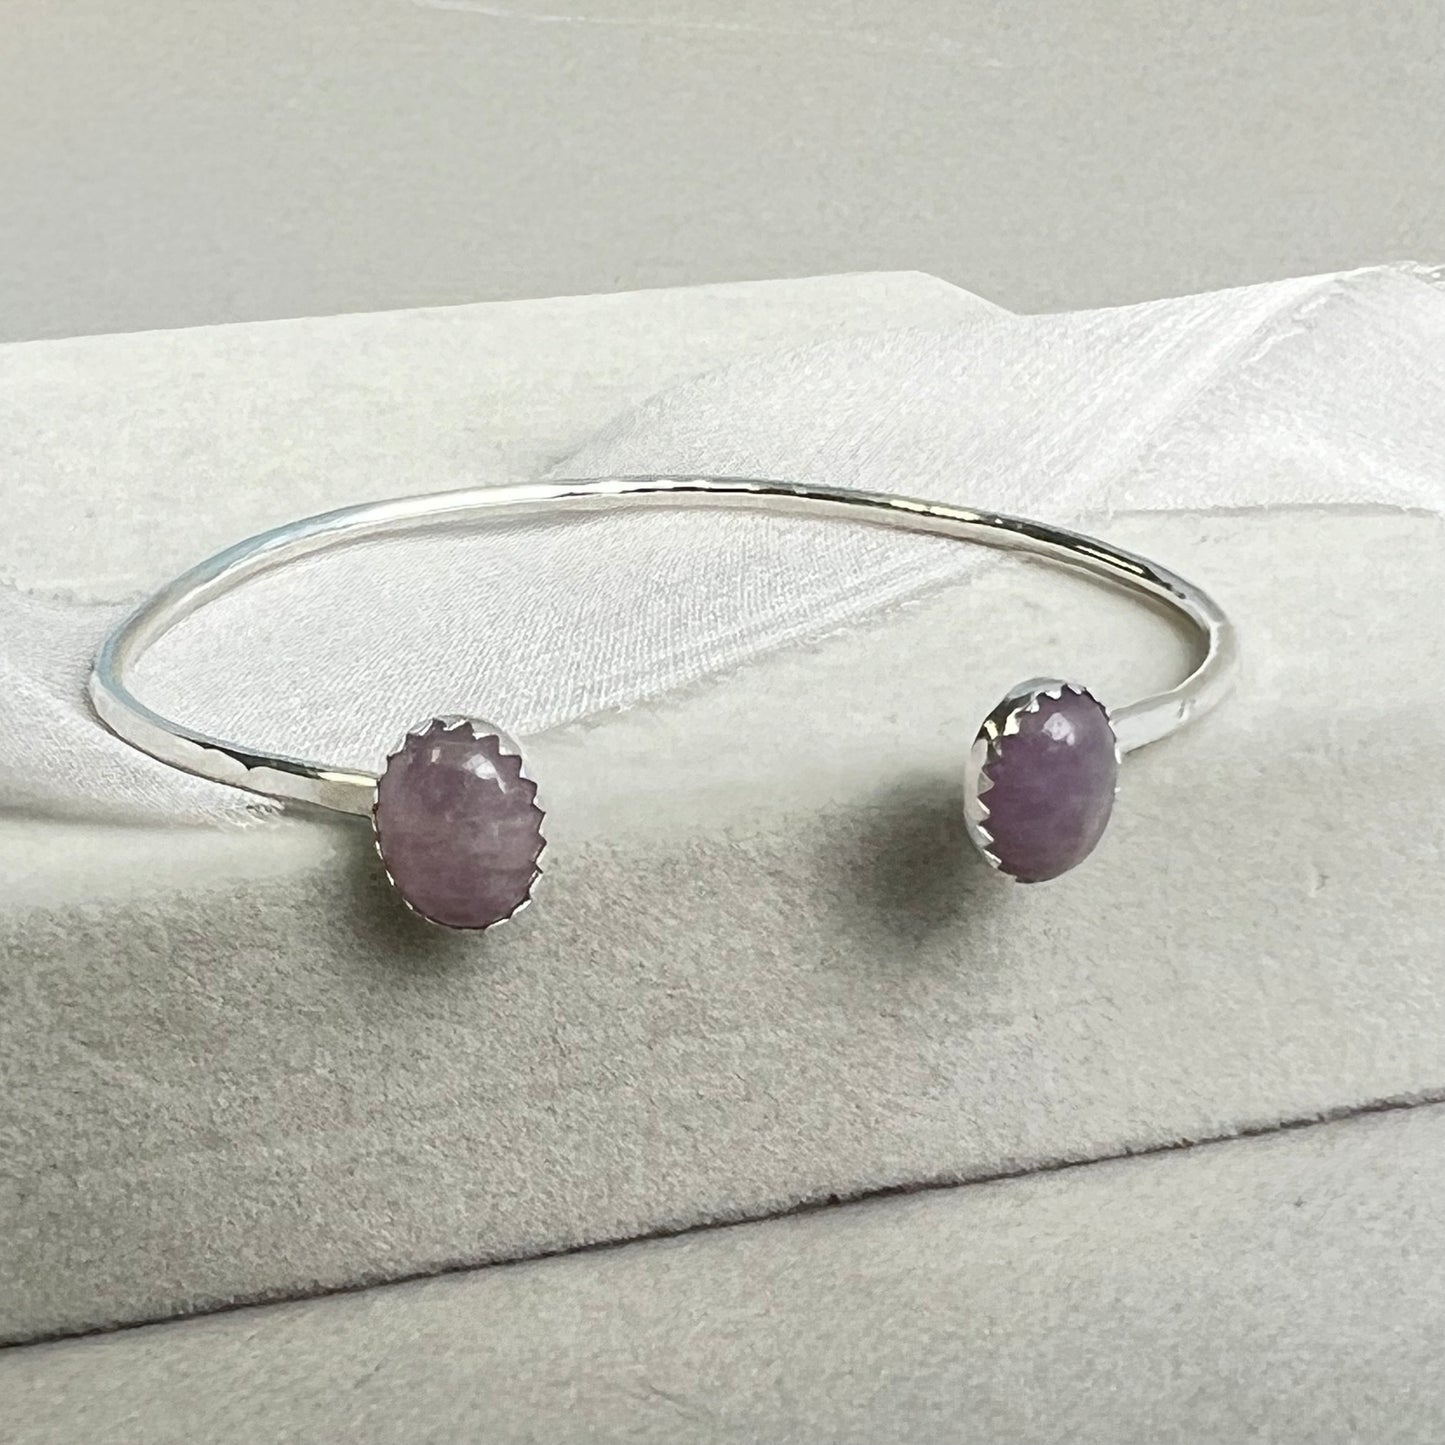 Silver Cuff Bangle with Stones - Monday 9th September 10-1:30pm